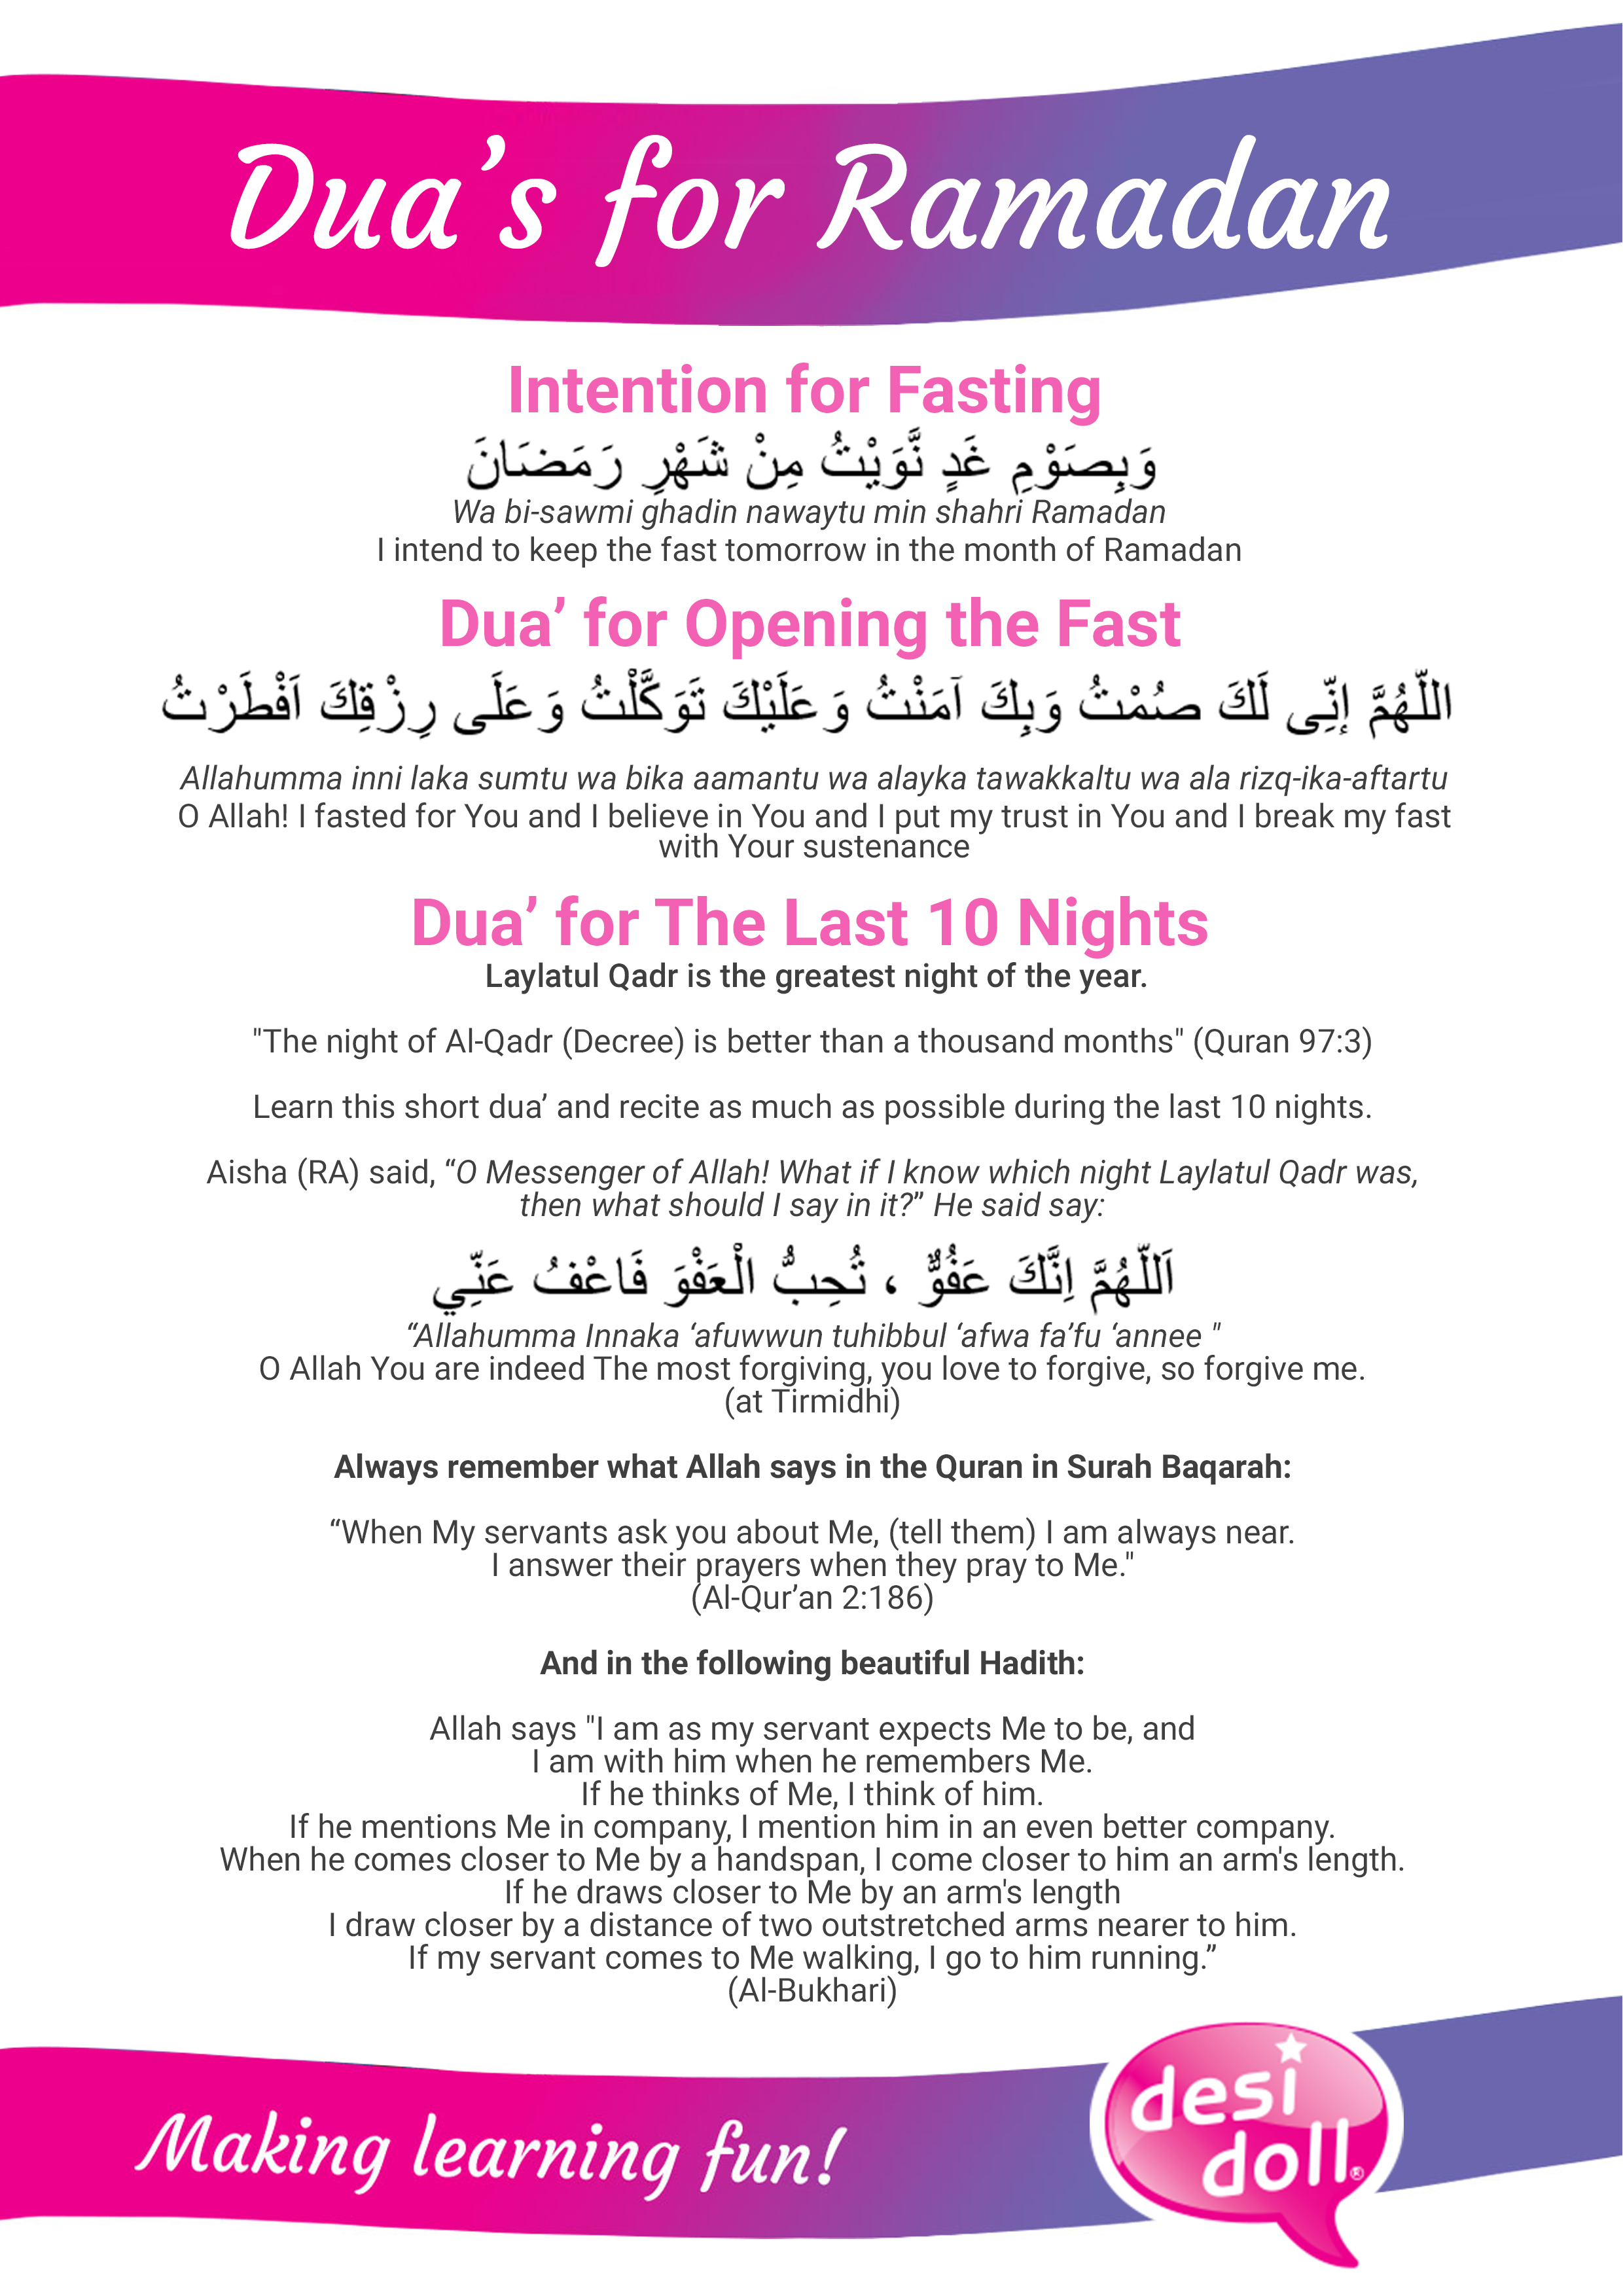 Family Dua' Reference Guide